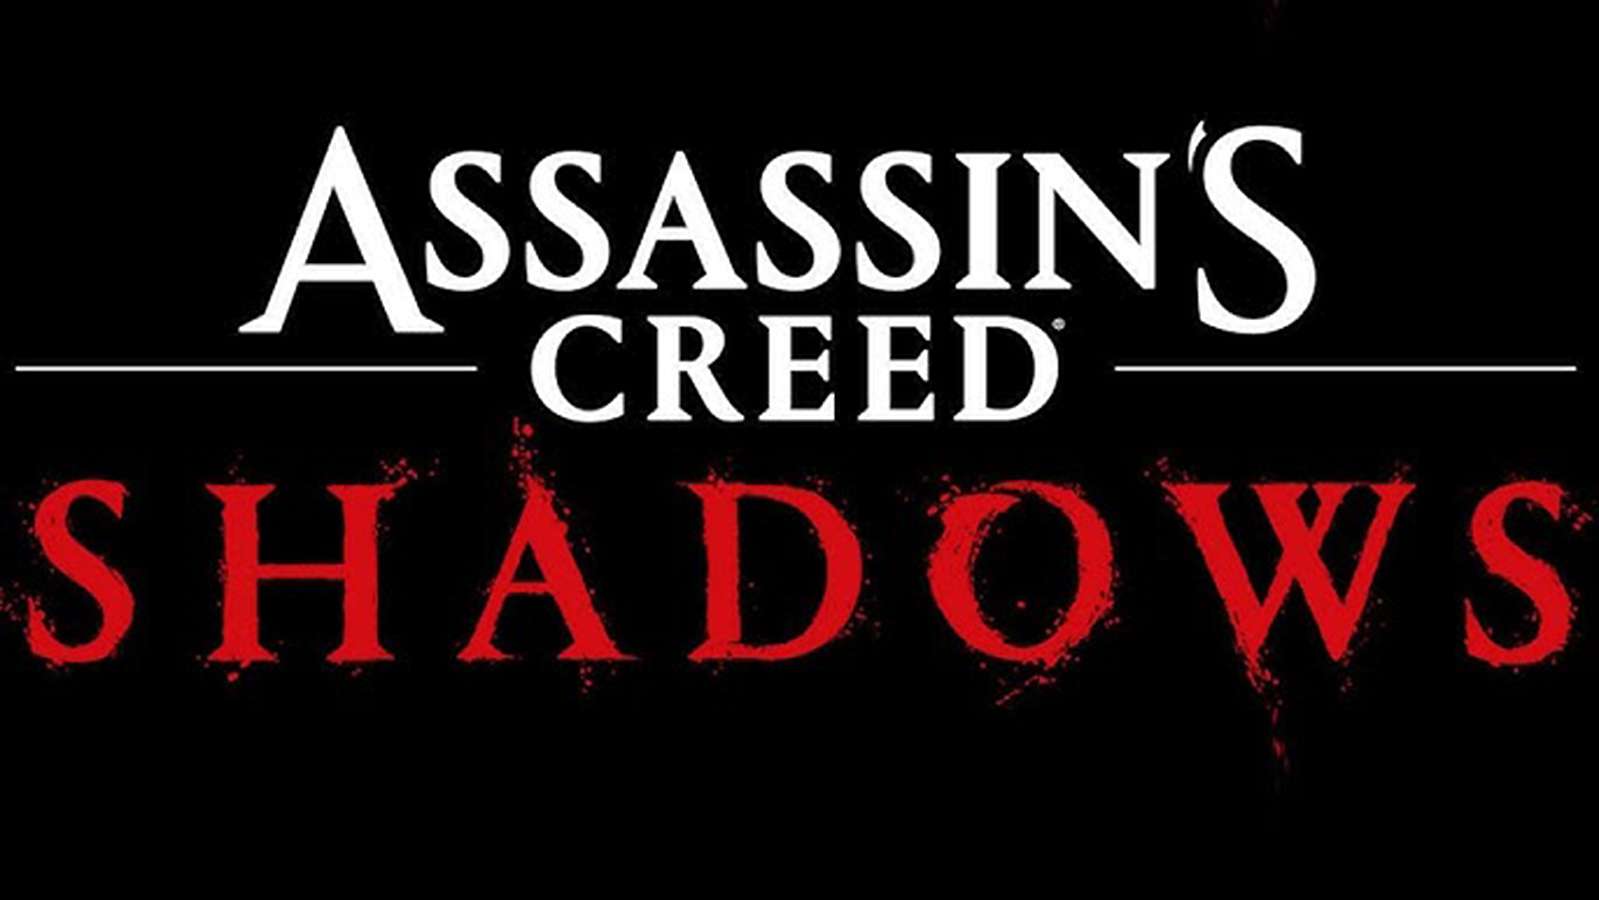 Assassin's Creed Shadows Cover Art Leak Confirms Dual Protagonists